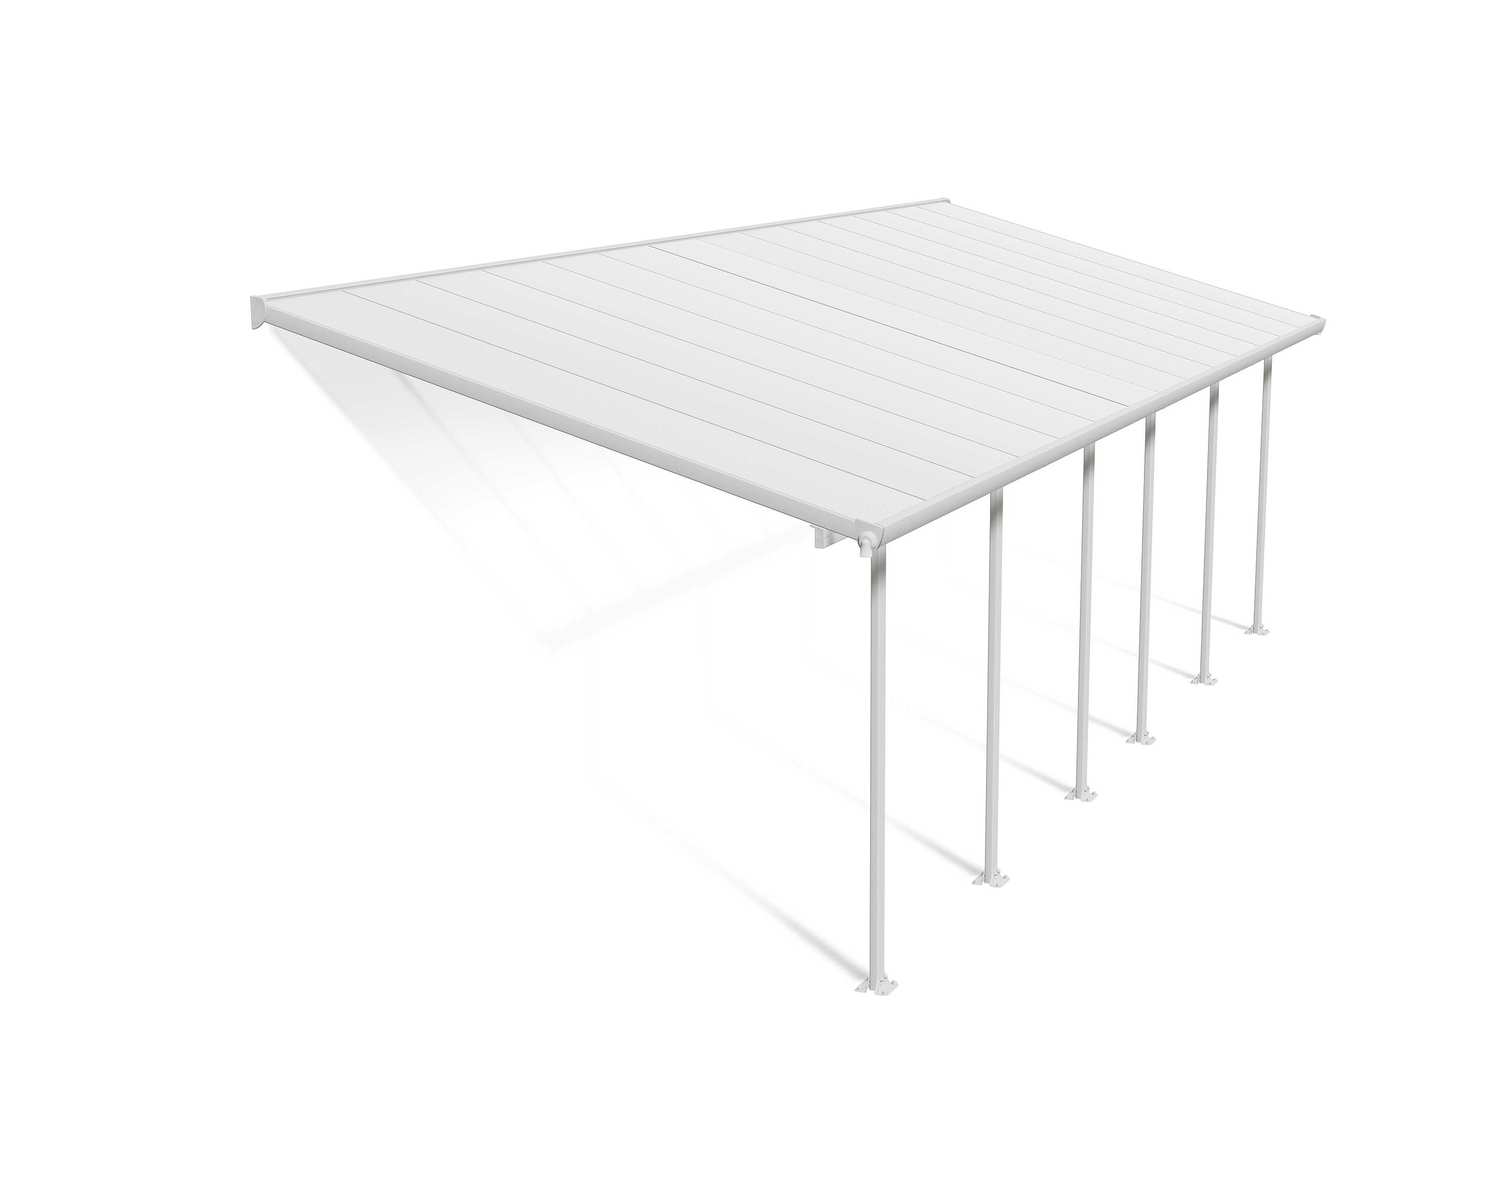 Feria 10 ft. x 28 ft. White Aluminium Patio Cover With 6 Posts, White Twin-Wall Polycarbonate Roof Panels.